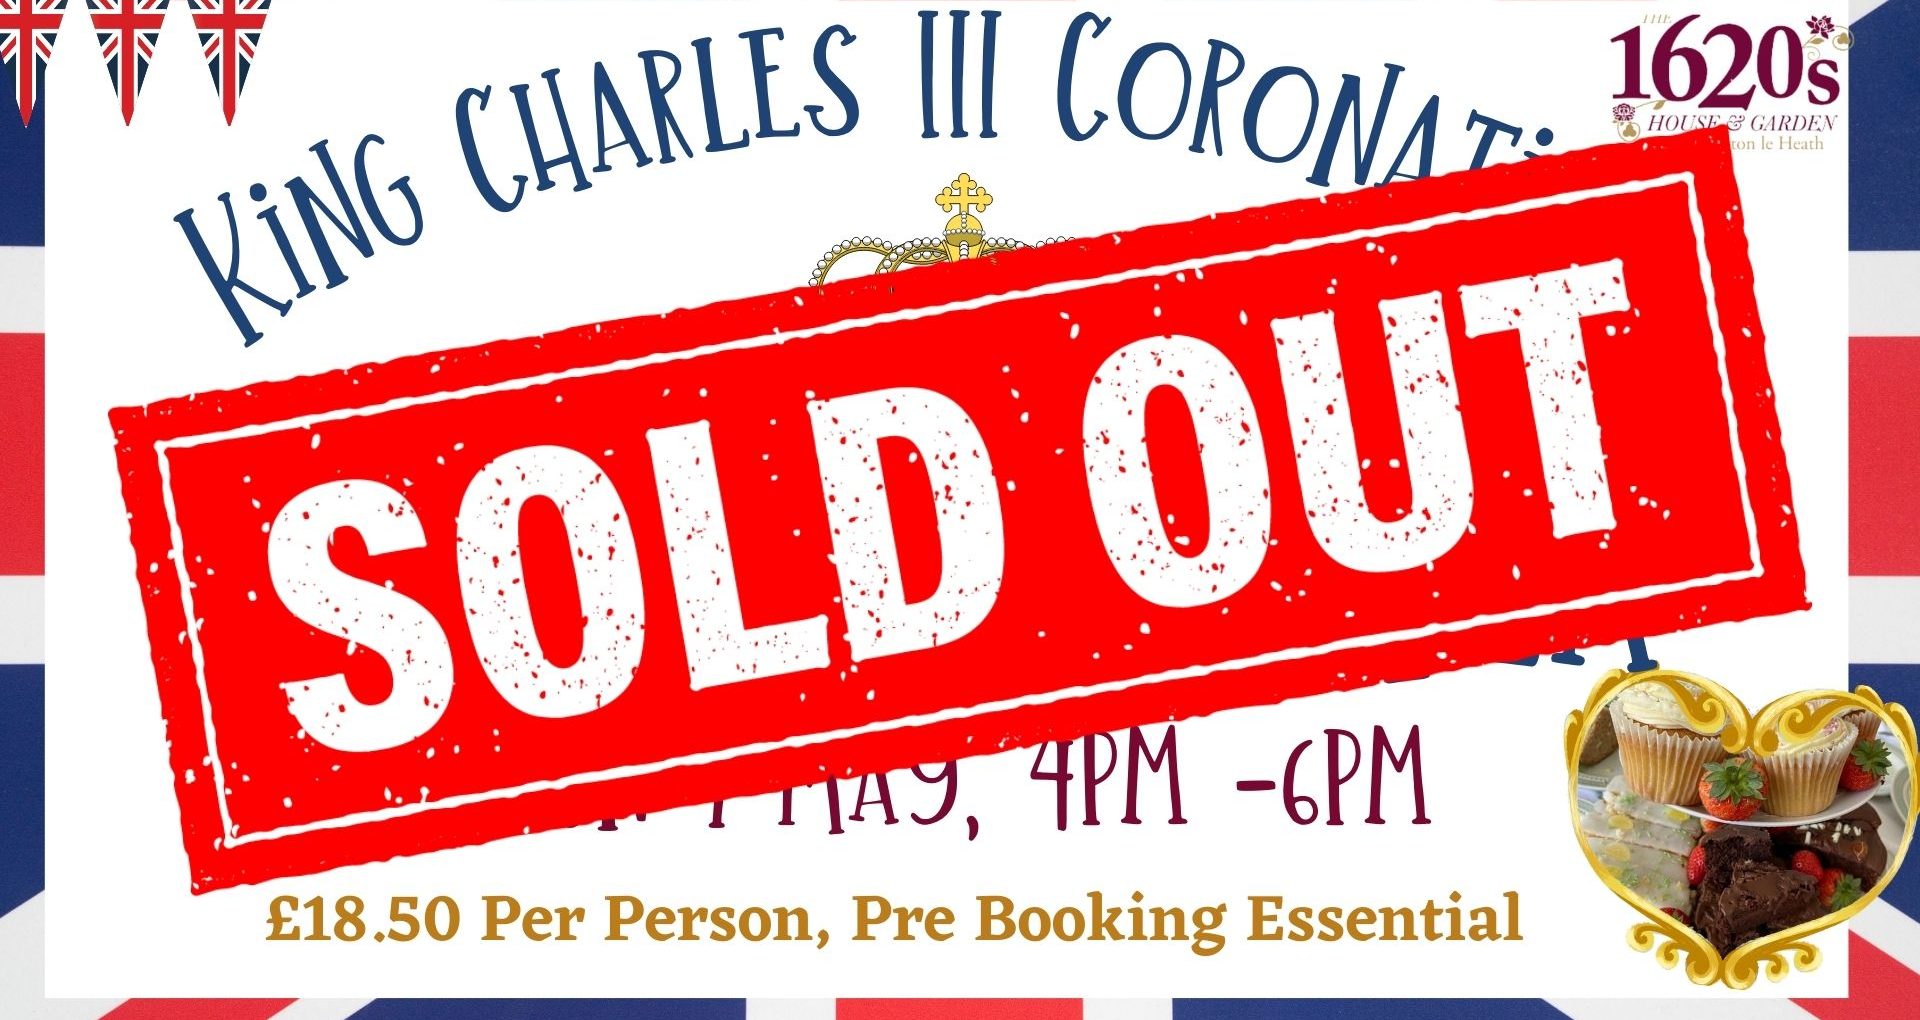 SOLD OUT King Charles III Coronation Afternoon Tea